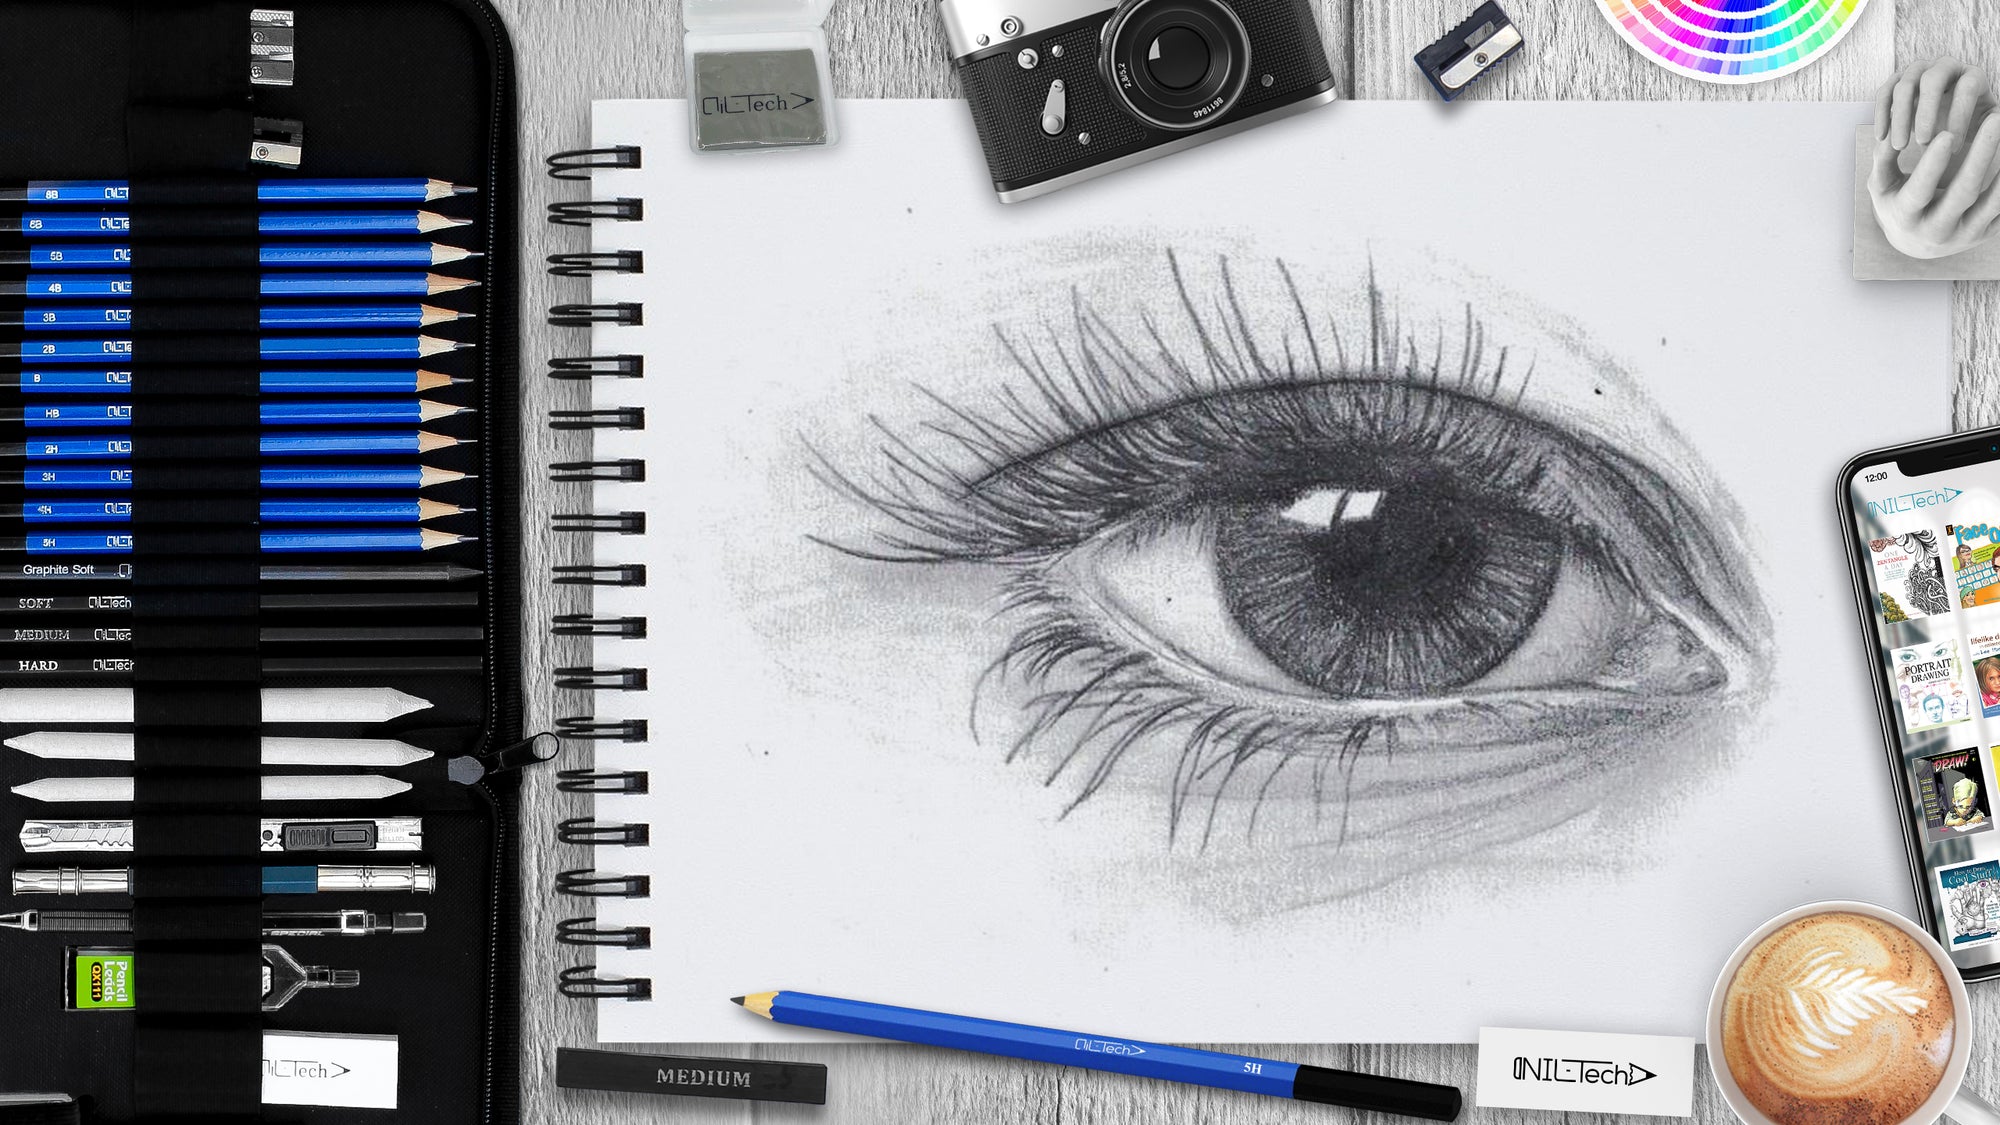 How to draw an woman eye step by step